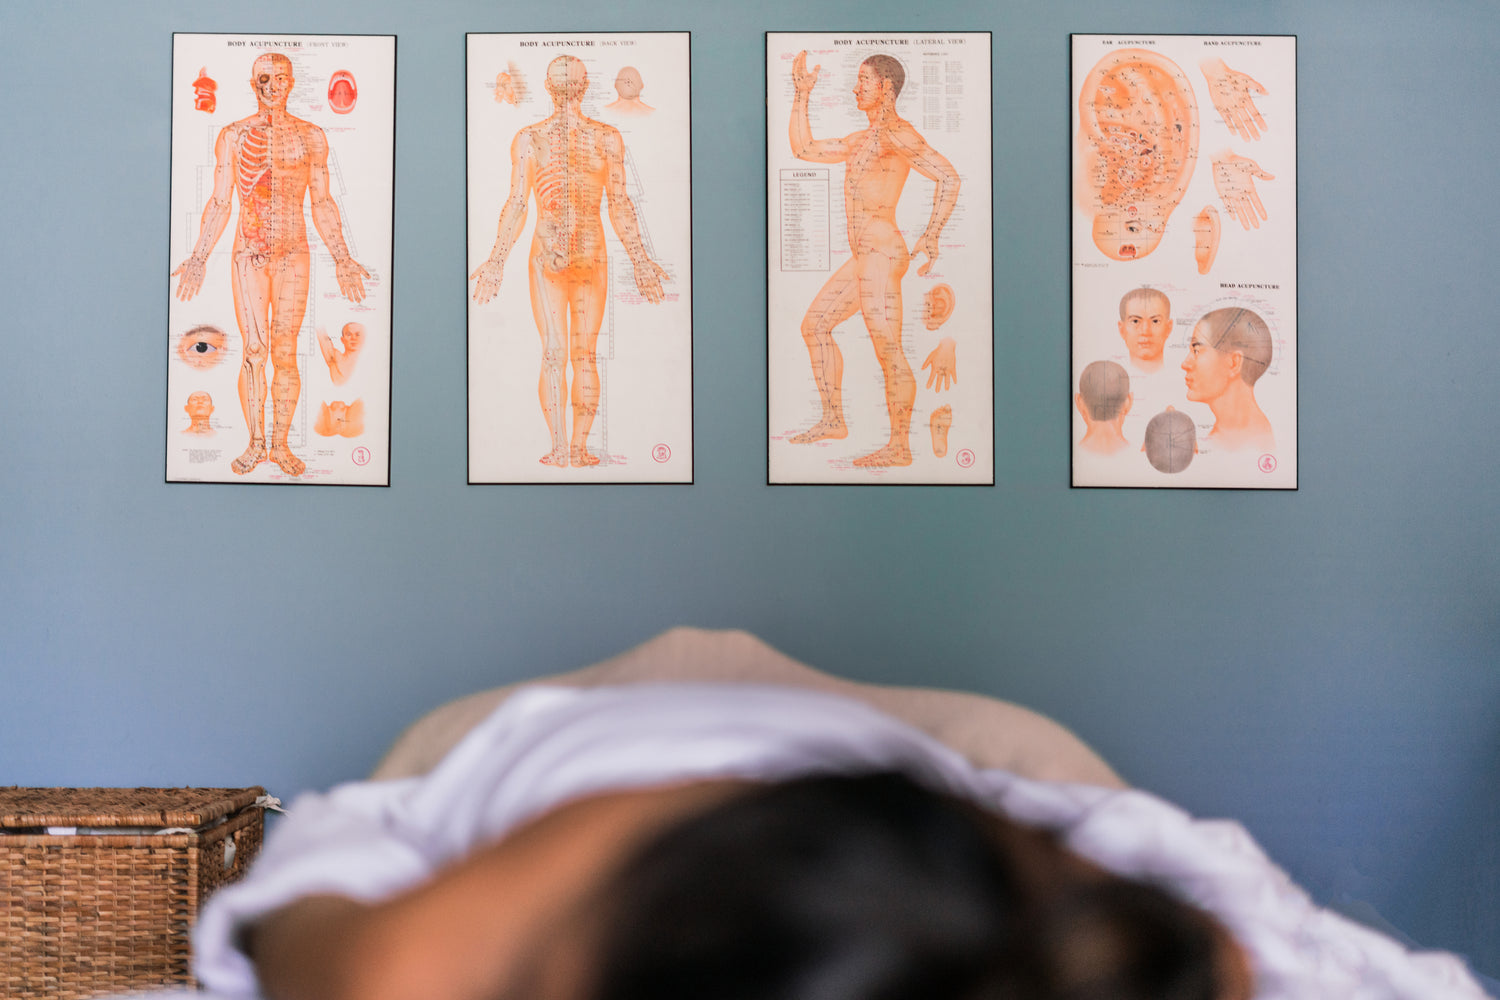 Massage reference charts on wall showing the body muscular strucure. 